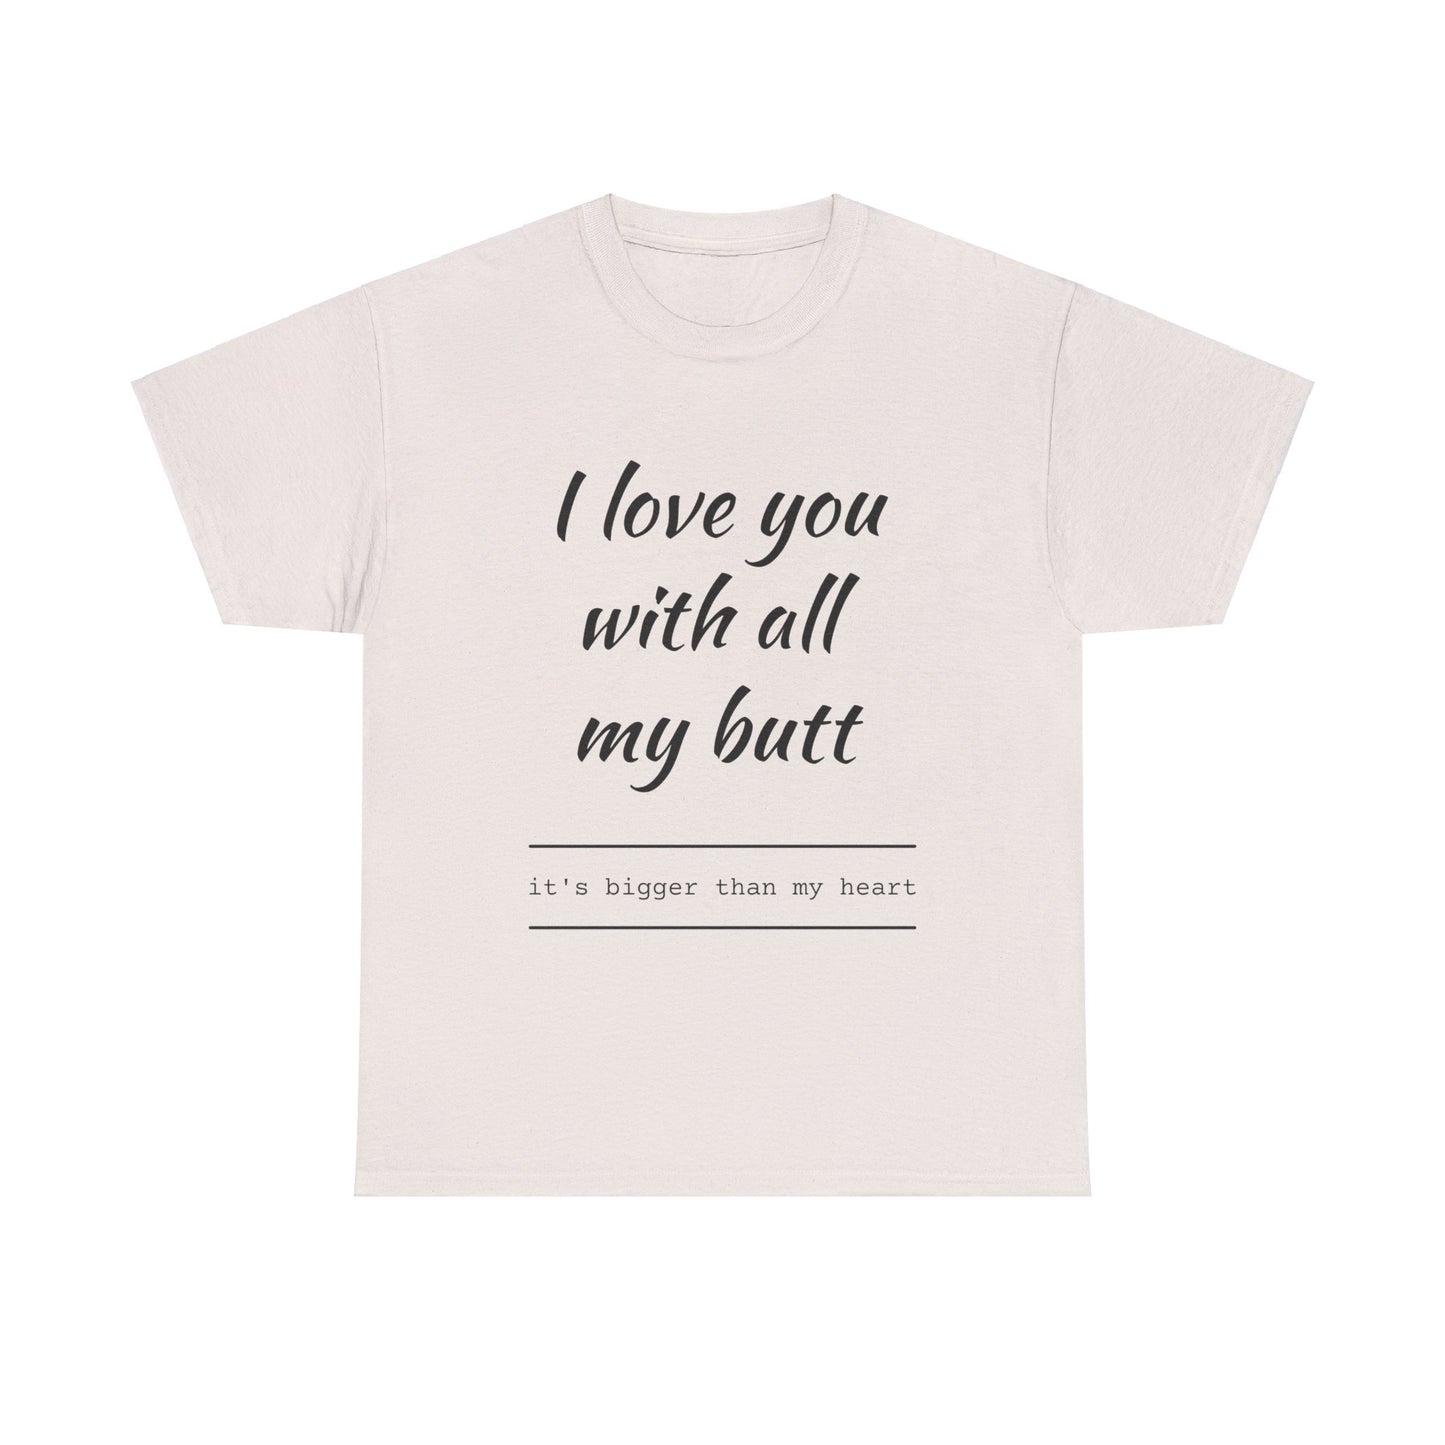 Love you with all my butt